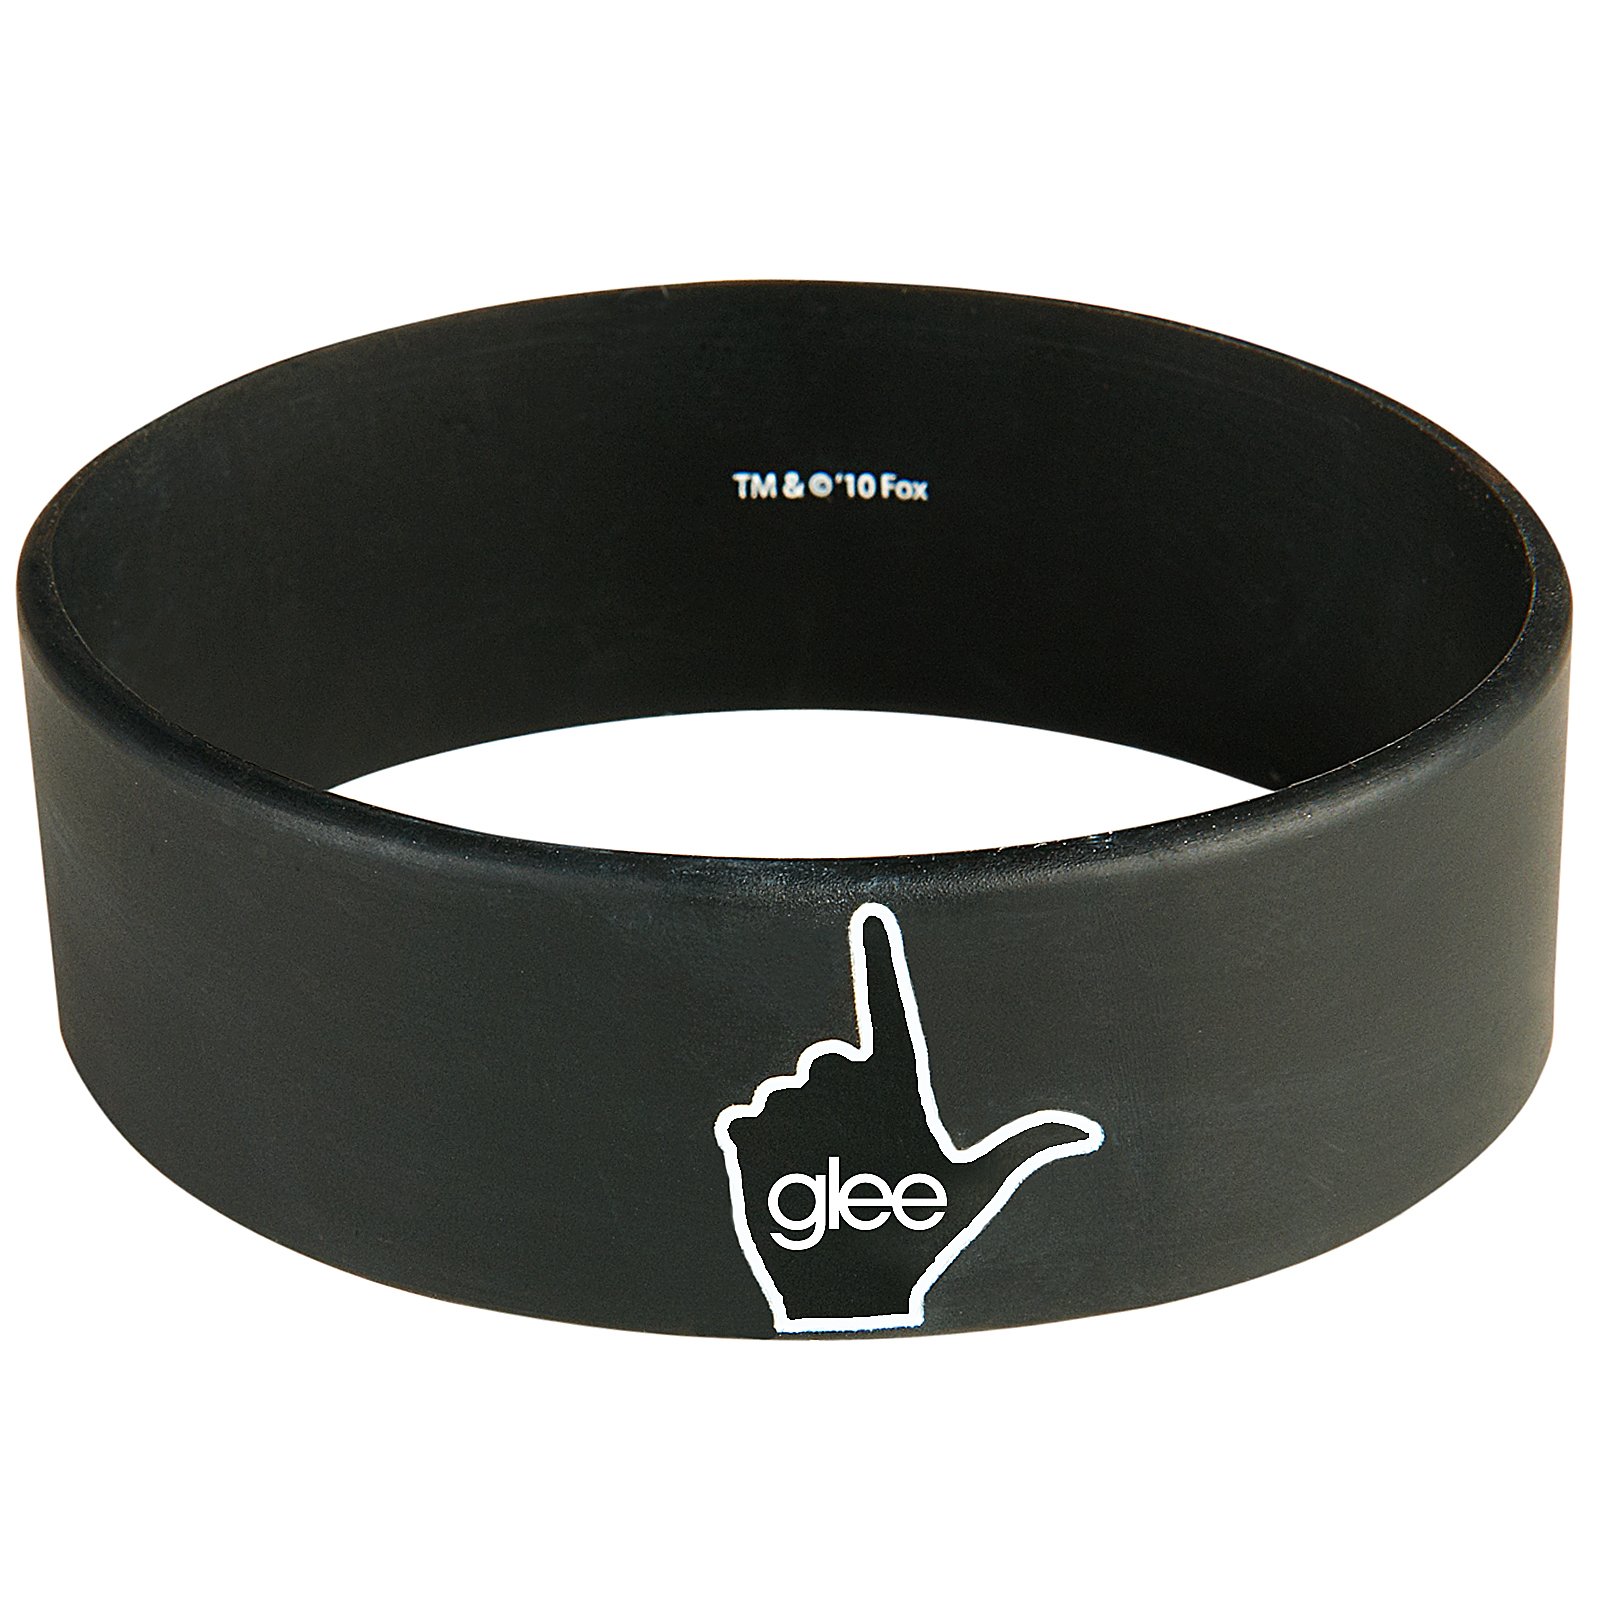 Glee Rubber Bracelet (1 count) - Click Image to Close